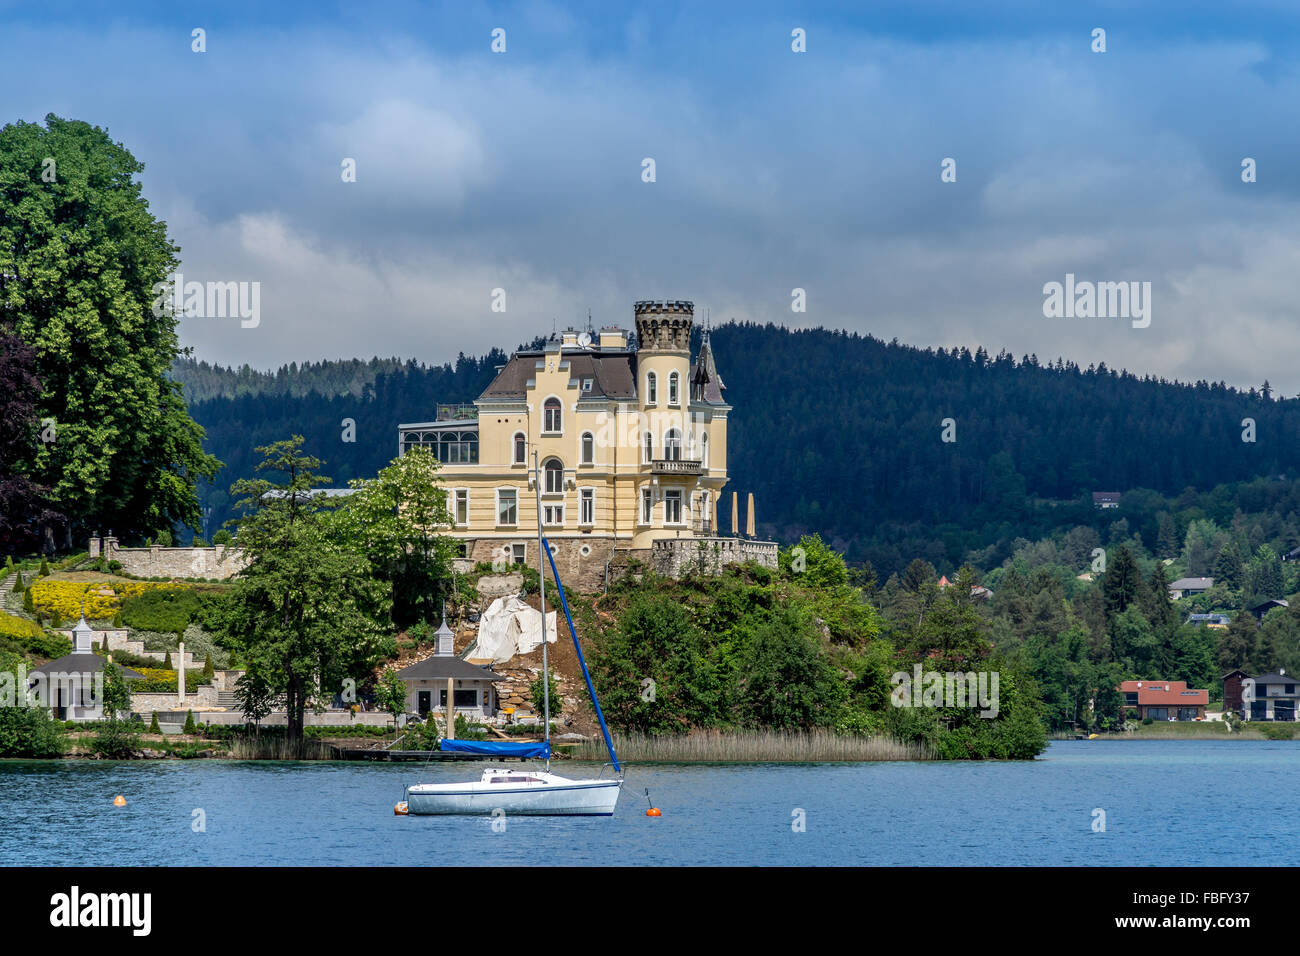 Reifnitz, a village in Carinthia, Austria, located at the Lake Woerther. Stock Photo